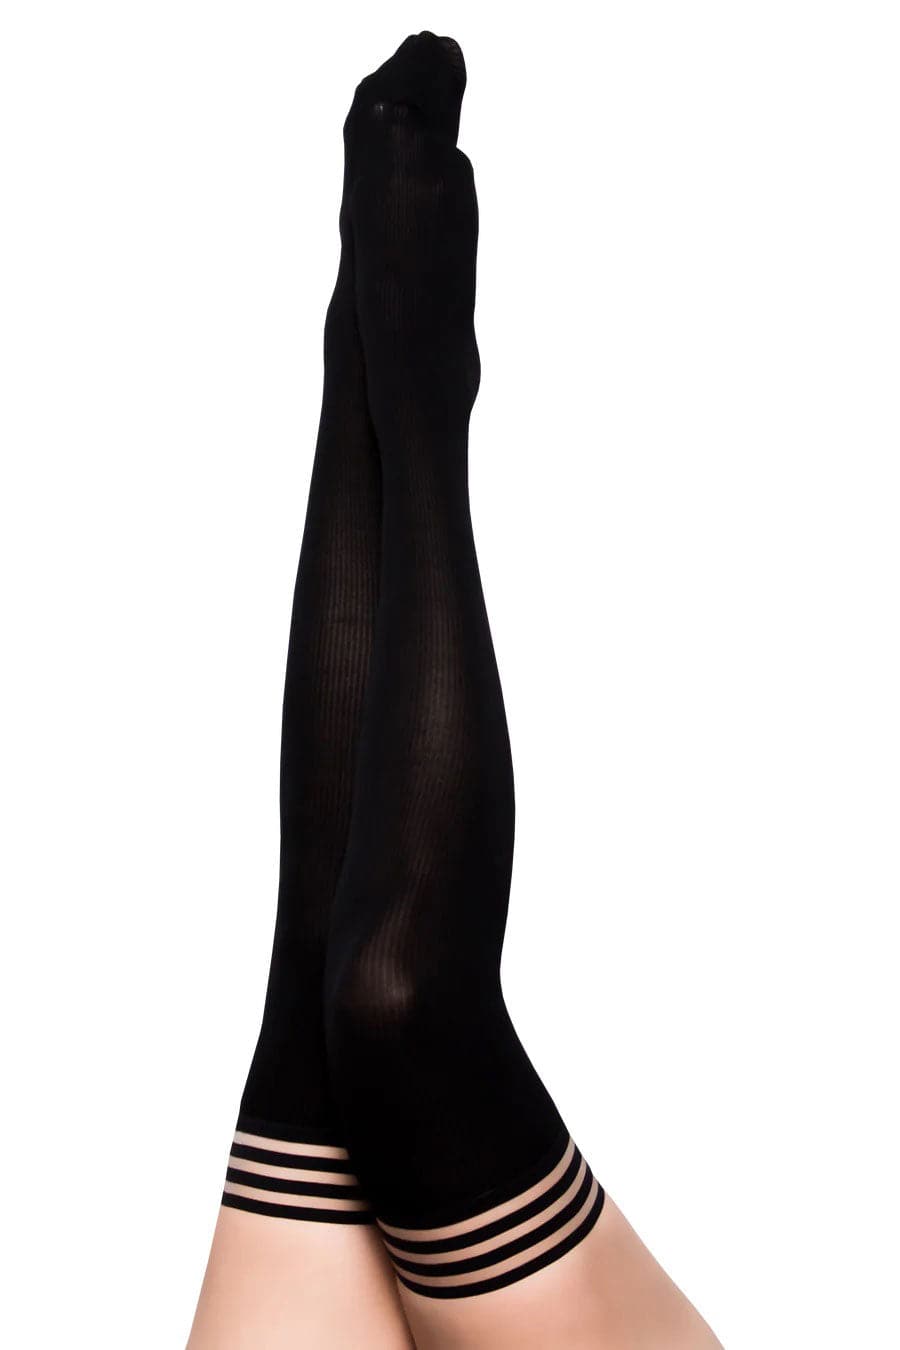 dance body stocking, bodystockings for dancers